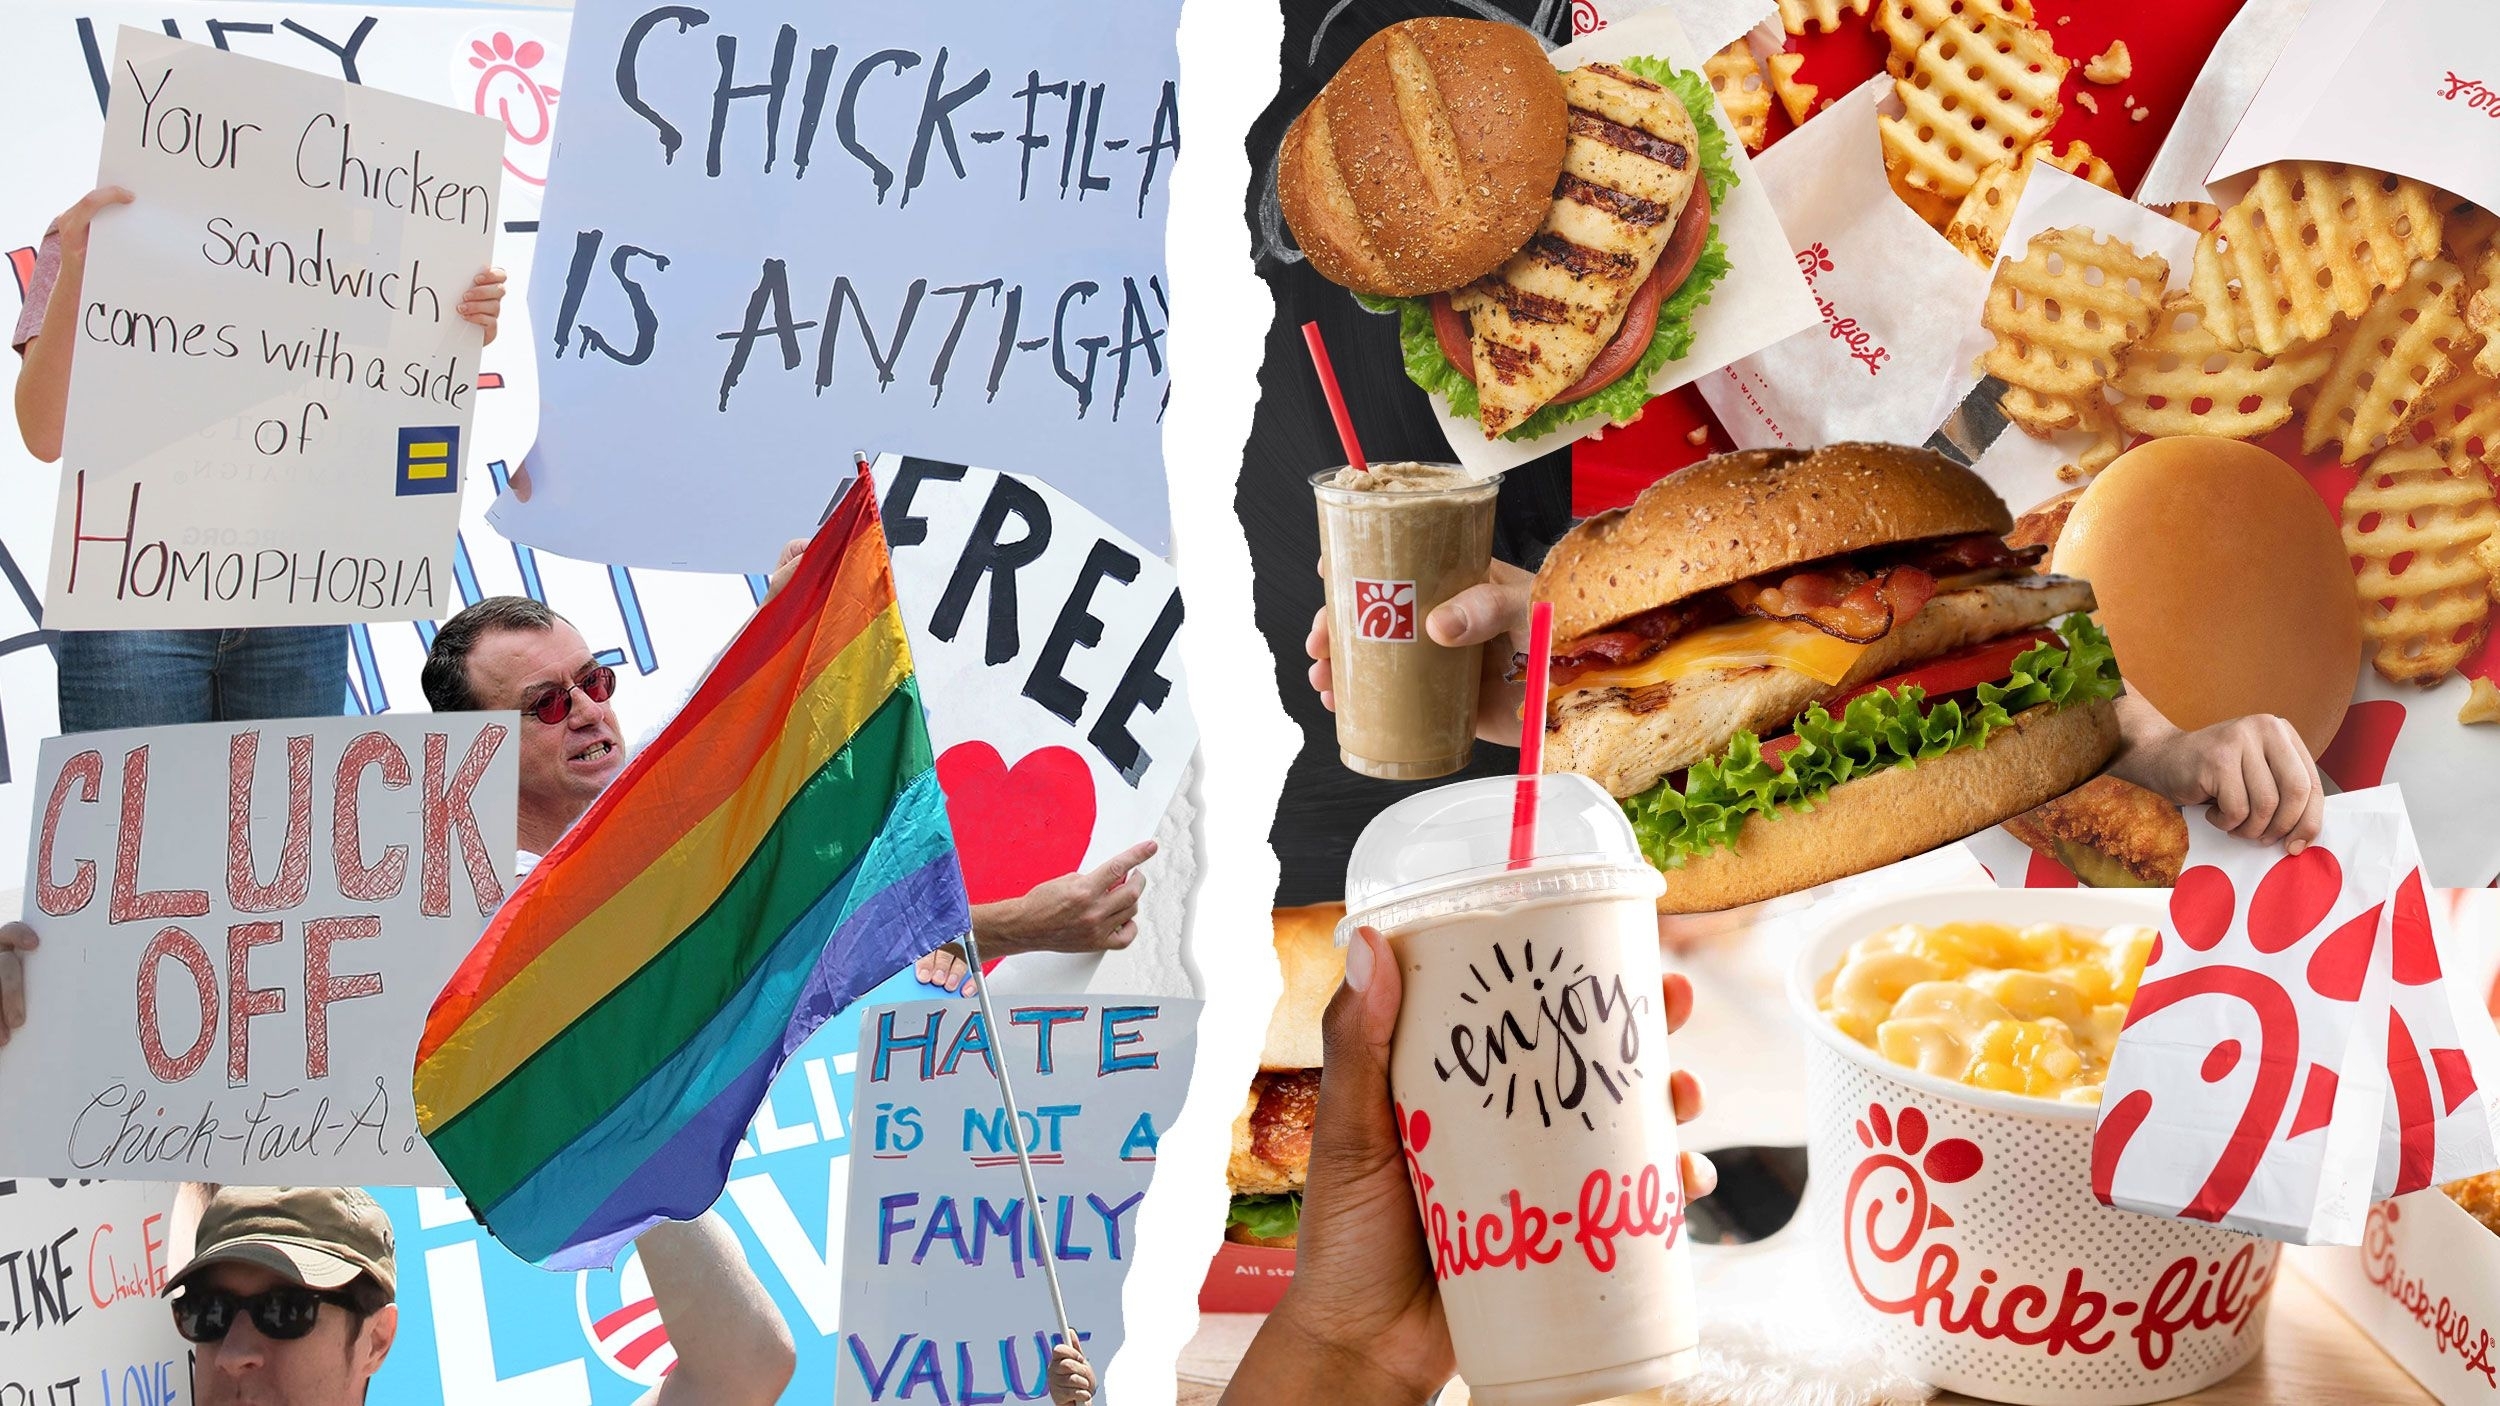 So Is It Okay To Eat At Chick-Fil-A Now?